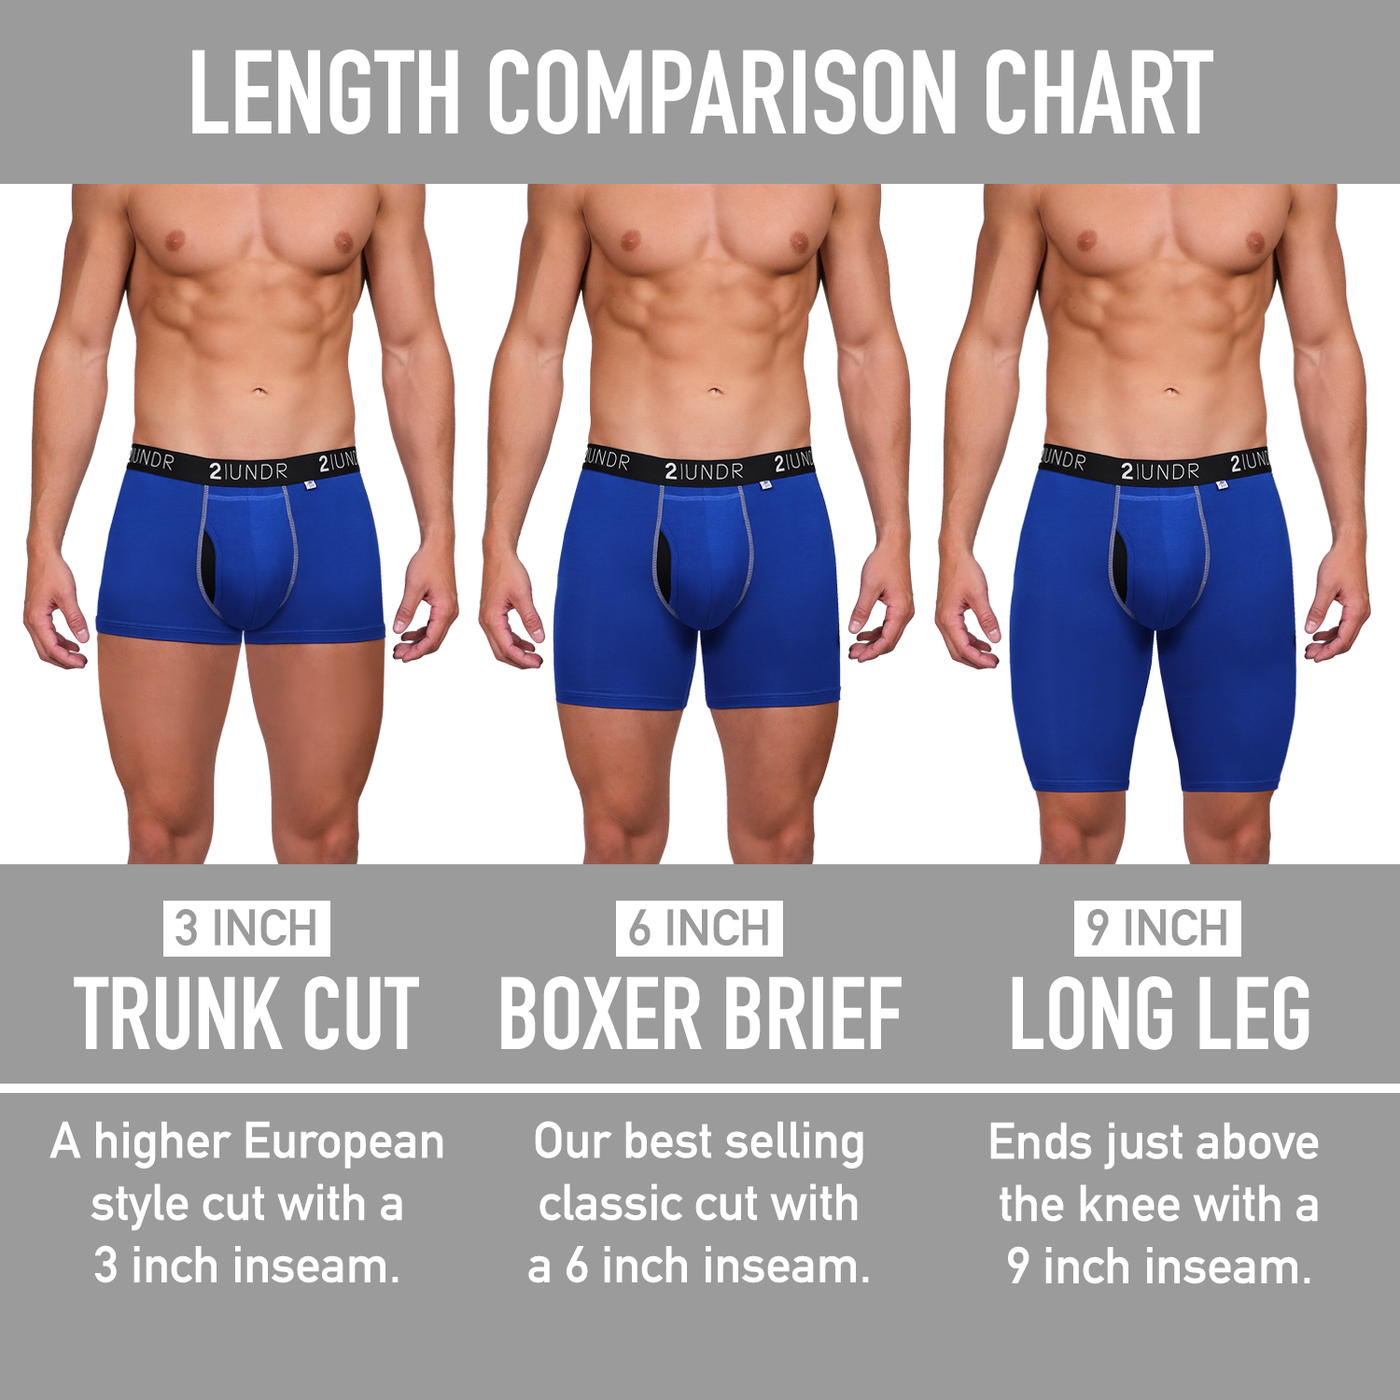 Swing Shift Boxer Brief - The Scrambled Collection  - 6 Pack